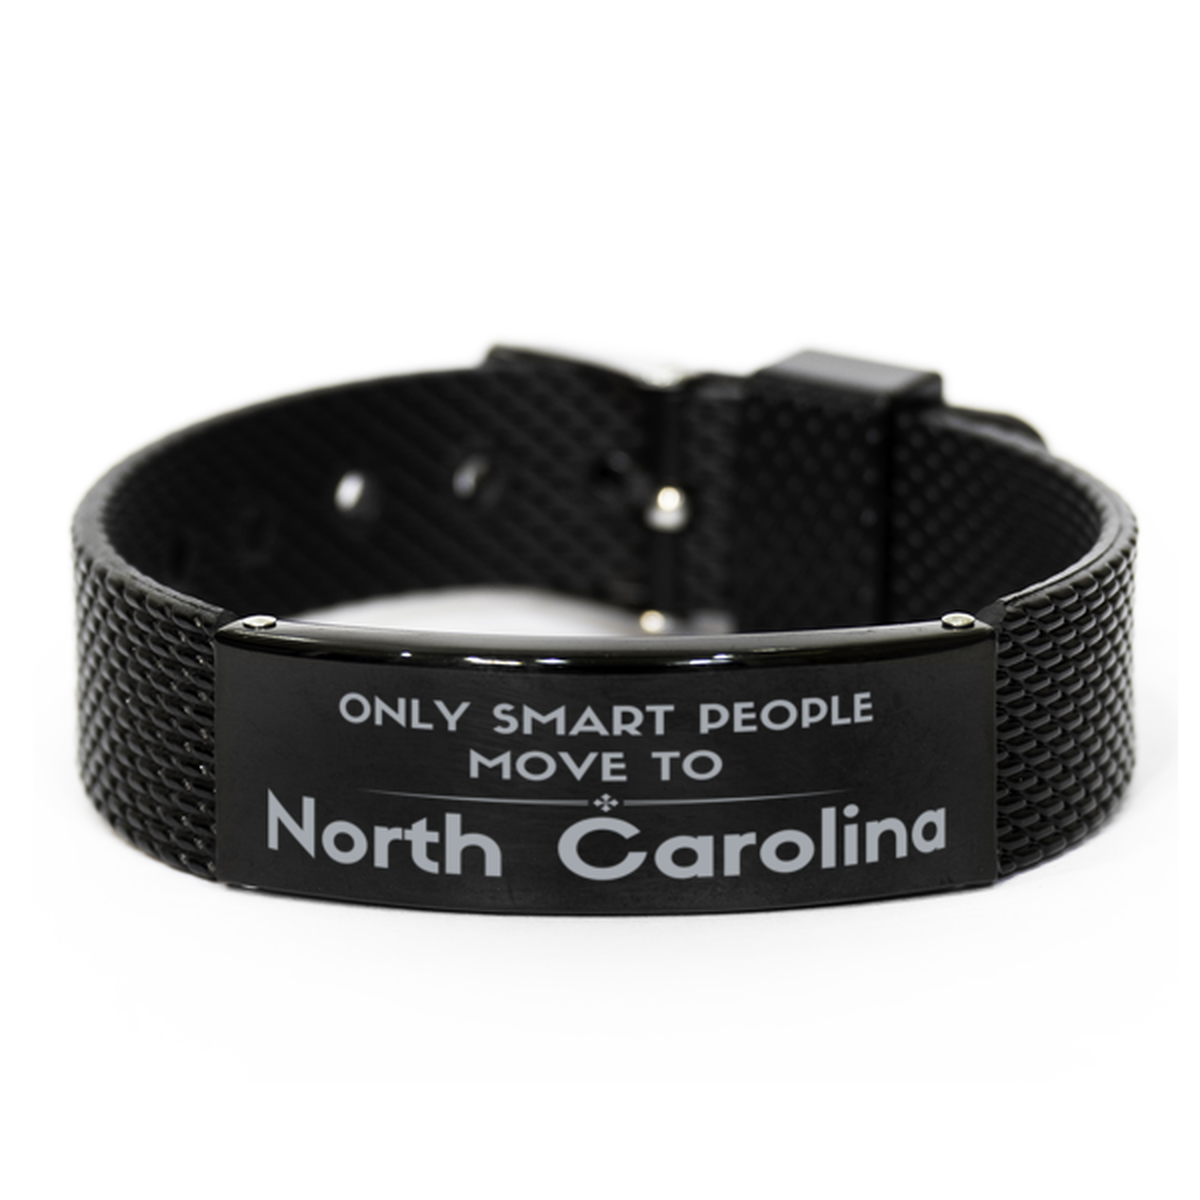 Only smart people move to North Carolina Black Shark Mesh Bracelet, Gag Gifts For North Carolina, Move to North Carolina Gifts for Friends Coworker Funny Saying Quote